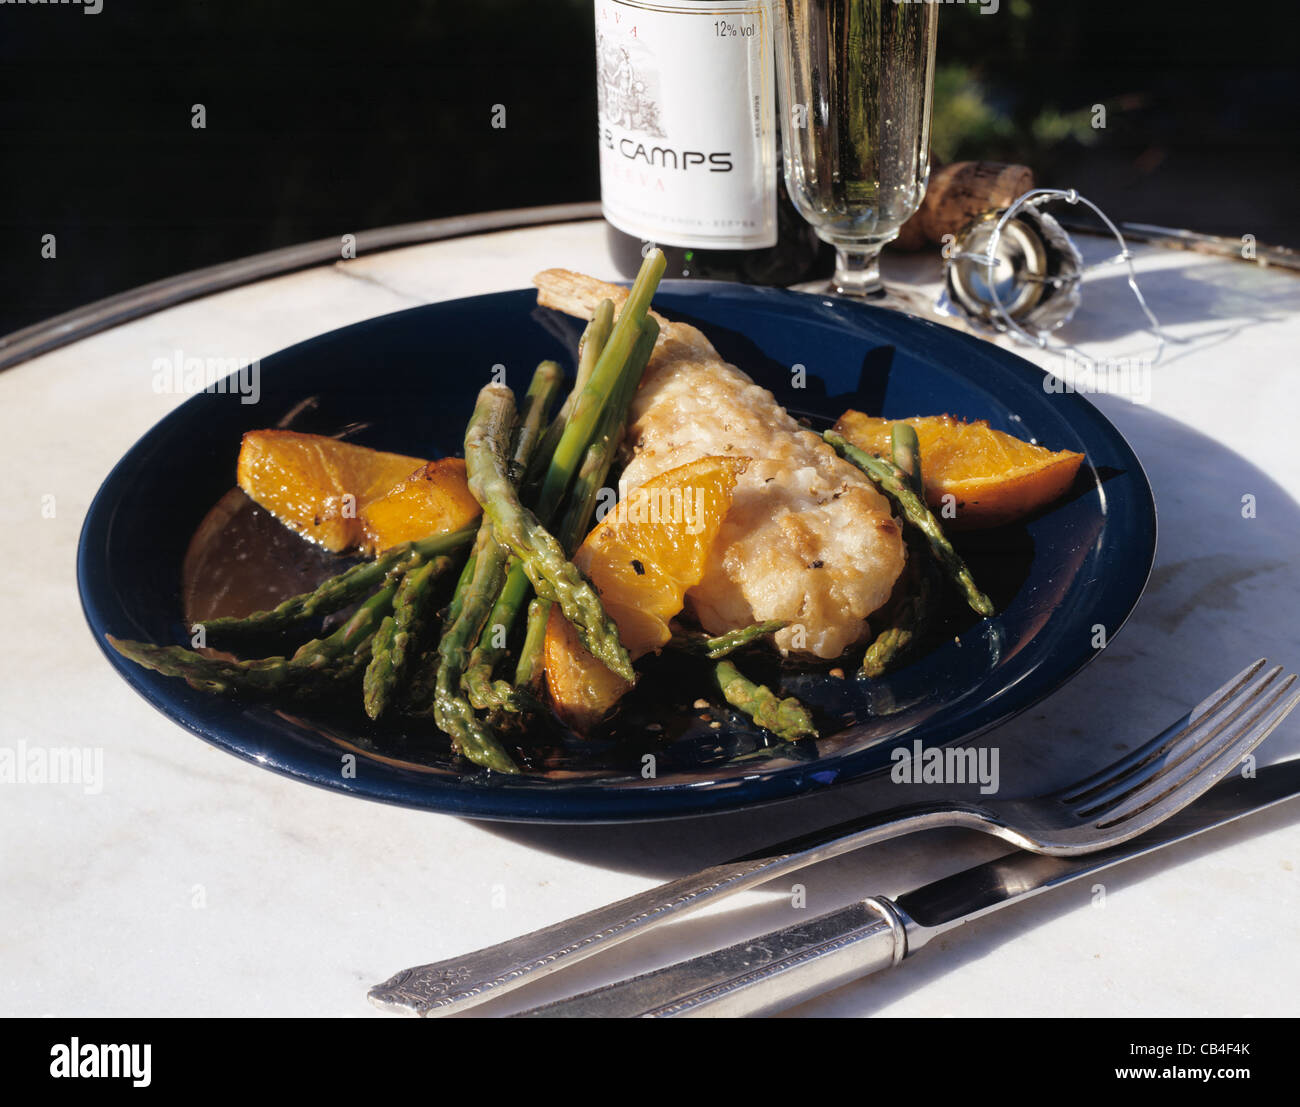 Monk fish with oranges and green asparagus Stock Photo